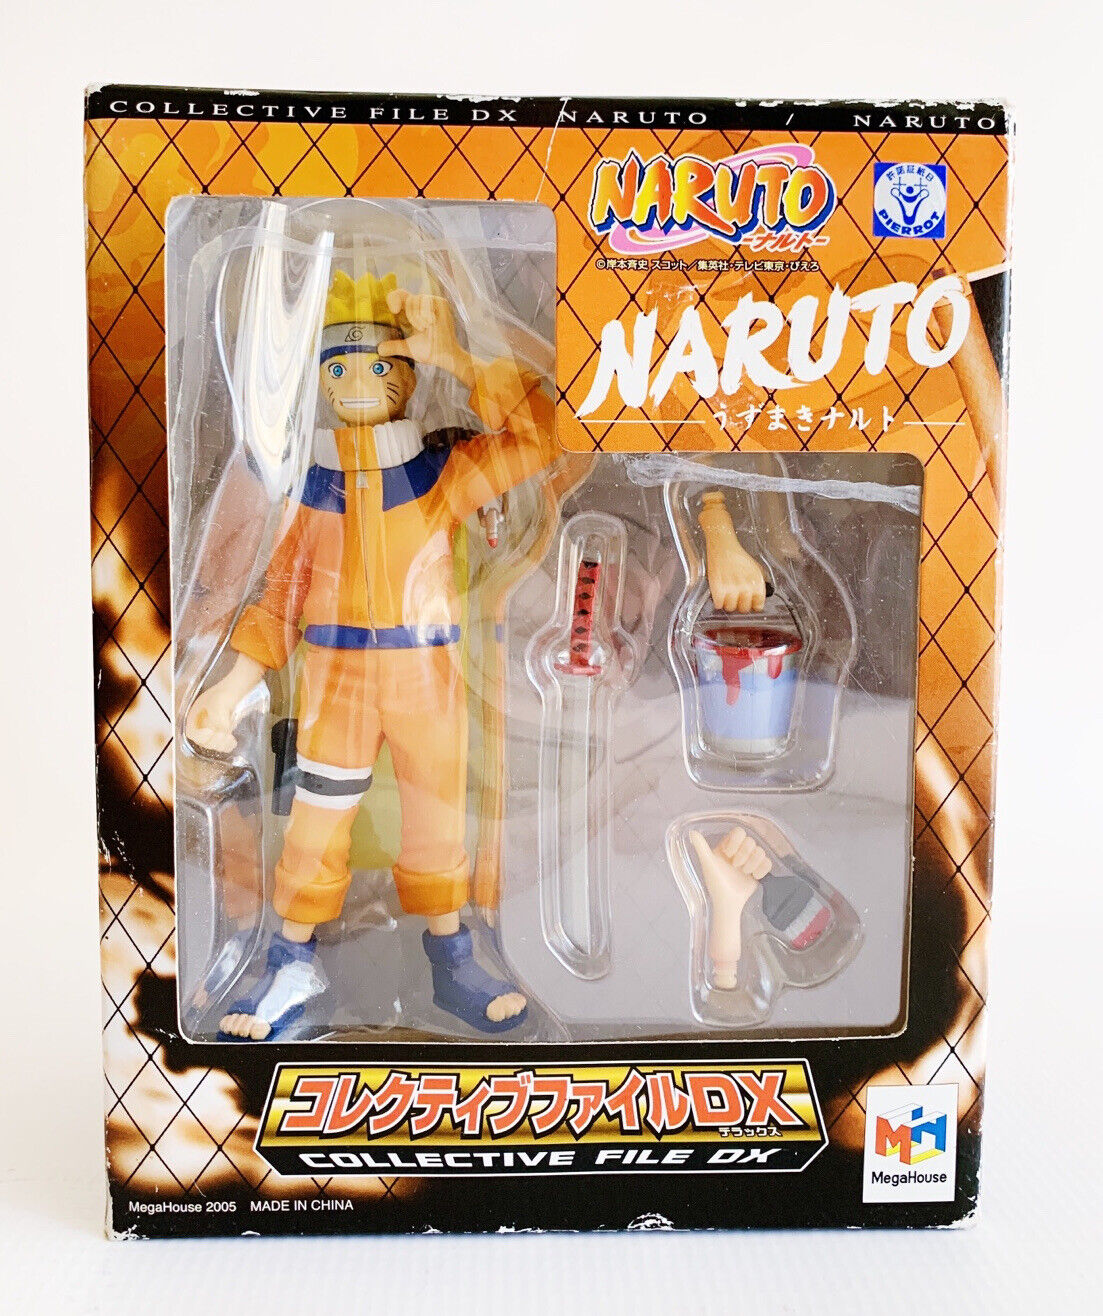 2005 NARUTO MEGAHOUSE COLLECTIVE FILE DX ACTION FIGURE